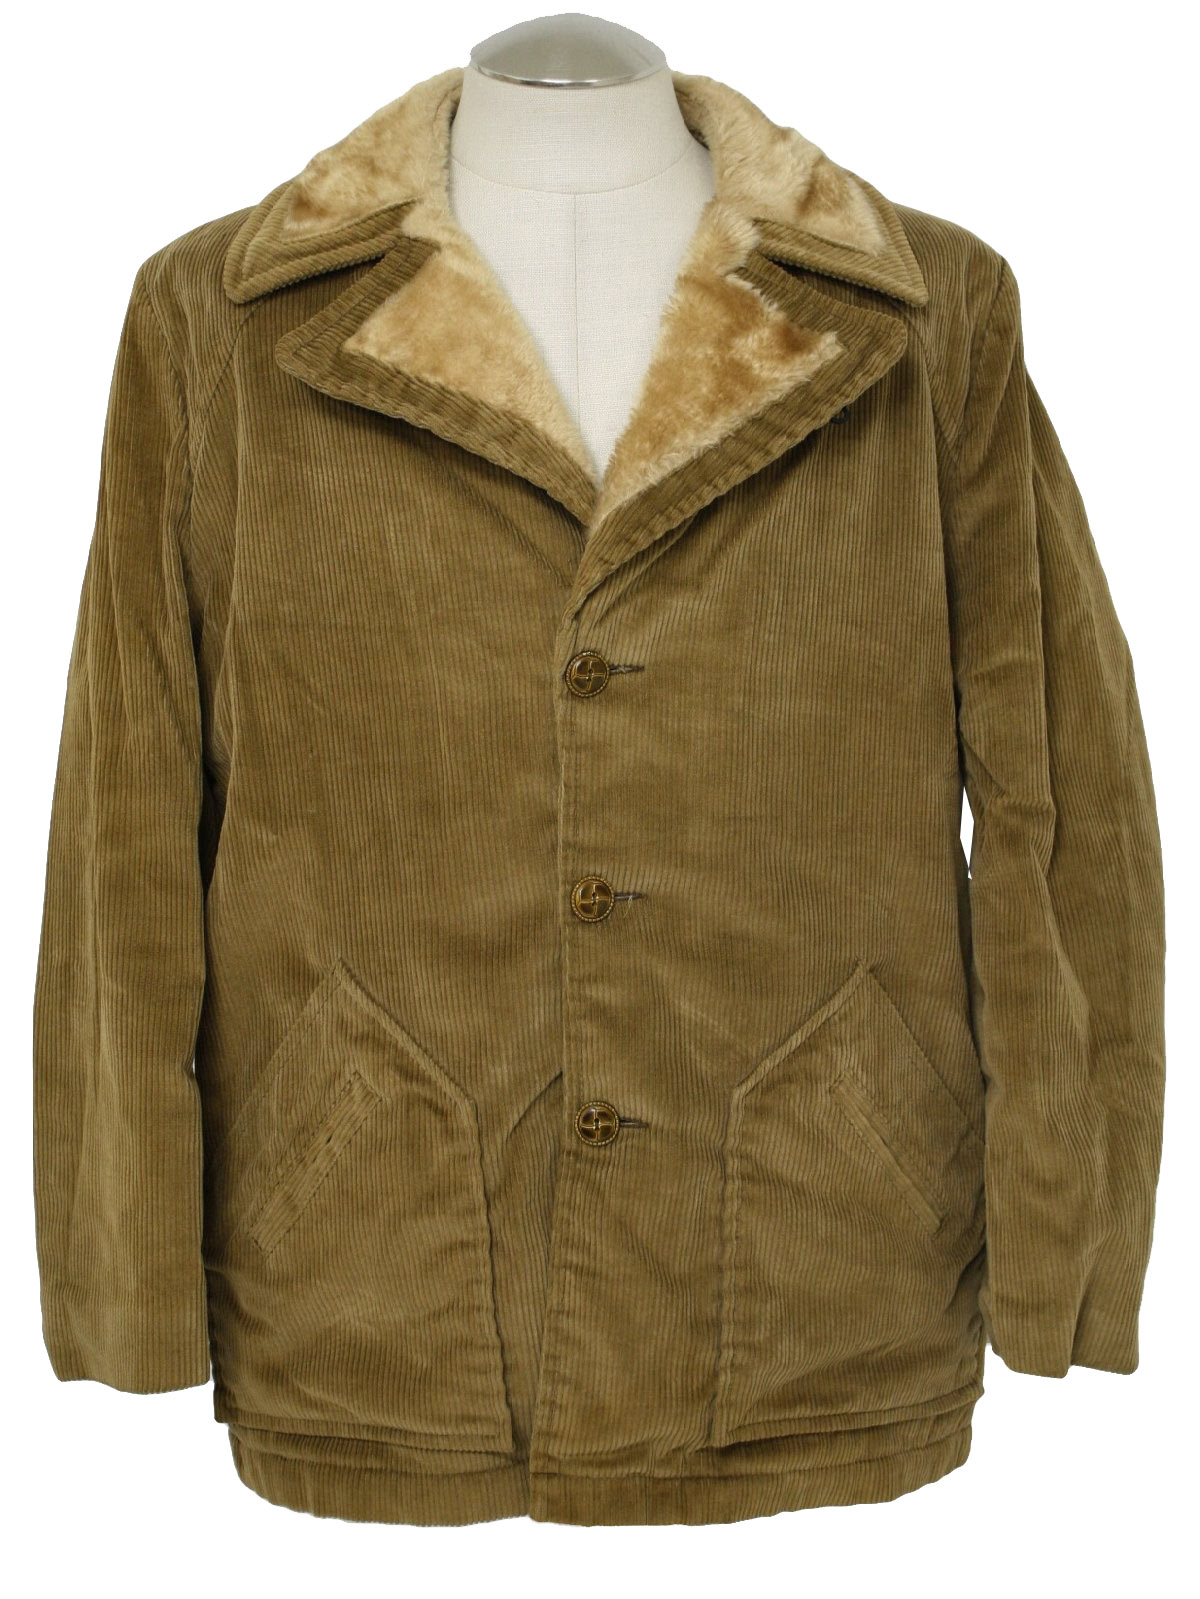 1970's Retro Jacket: 70s -Grais- Mens light brown and tan cotton with ...